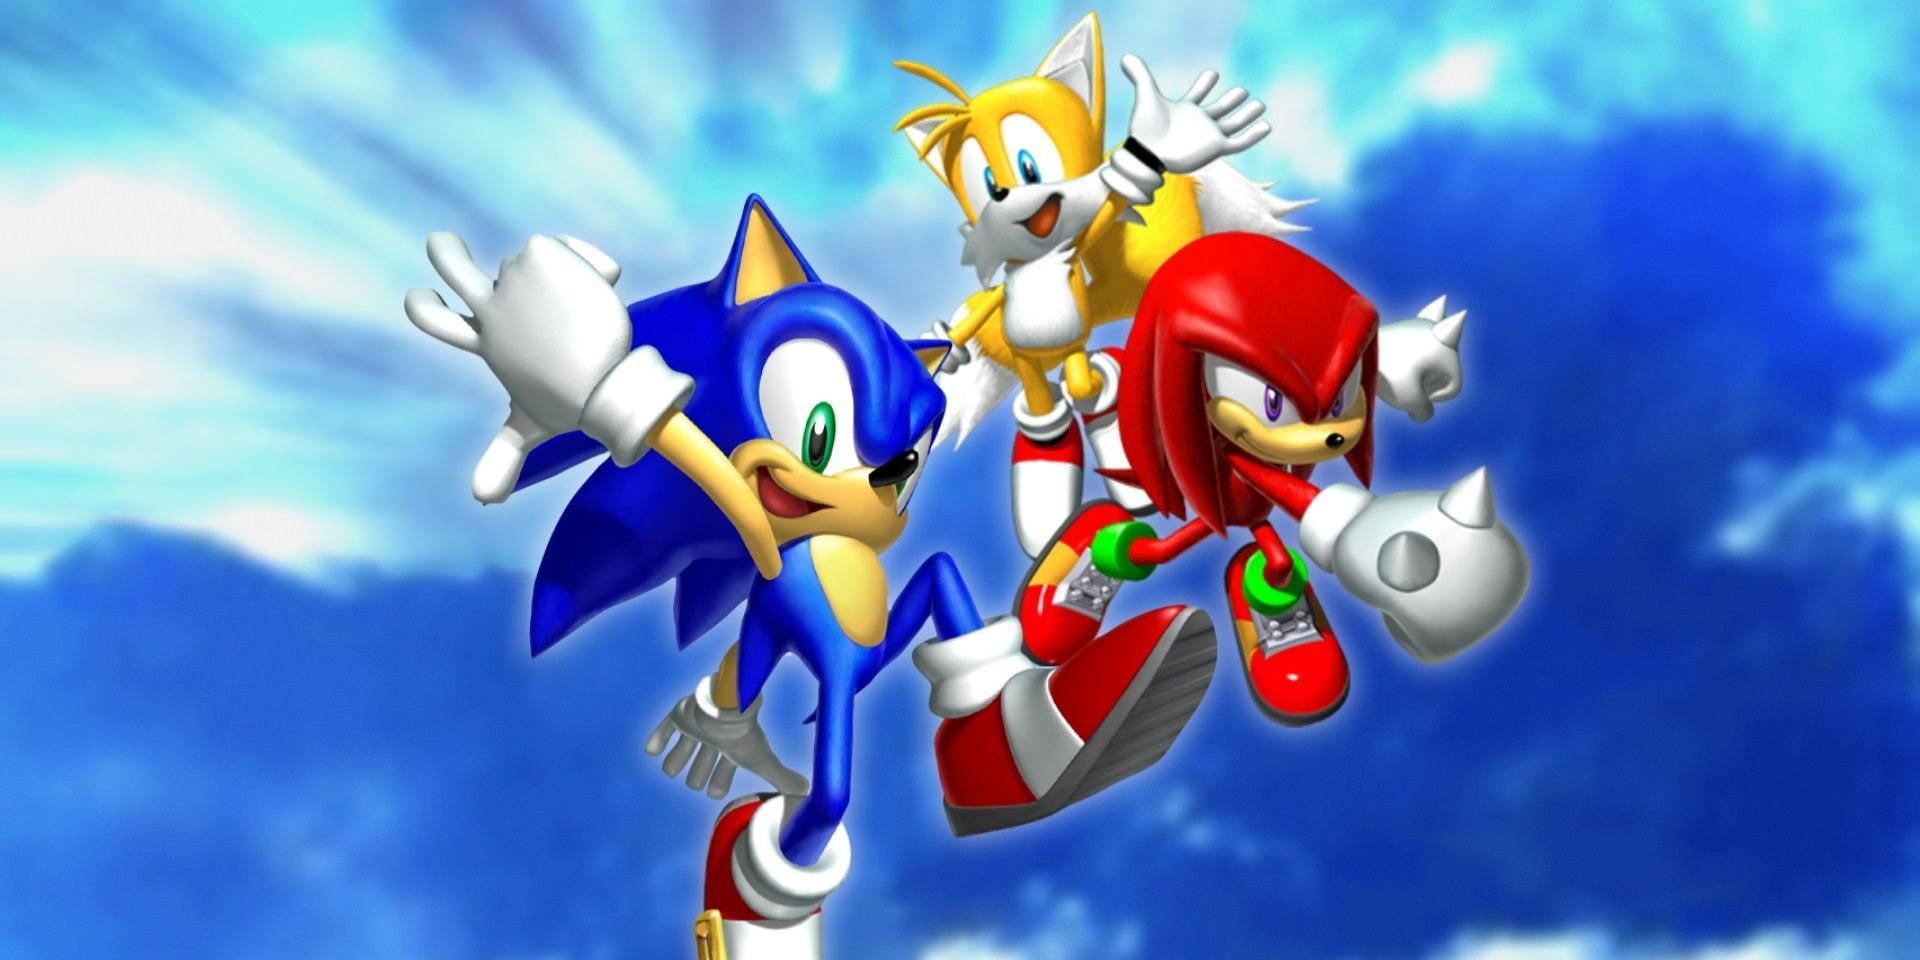 Sonic, Tails and Knuckles all jumping in the air